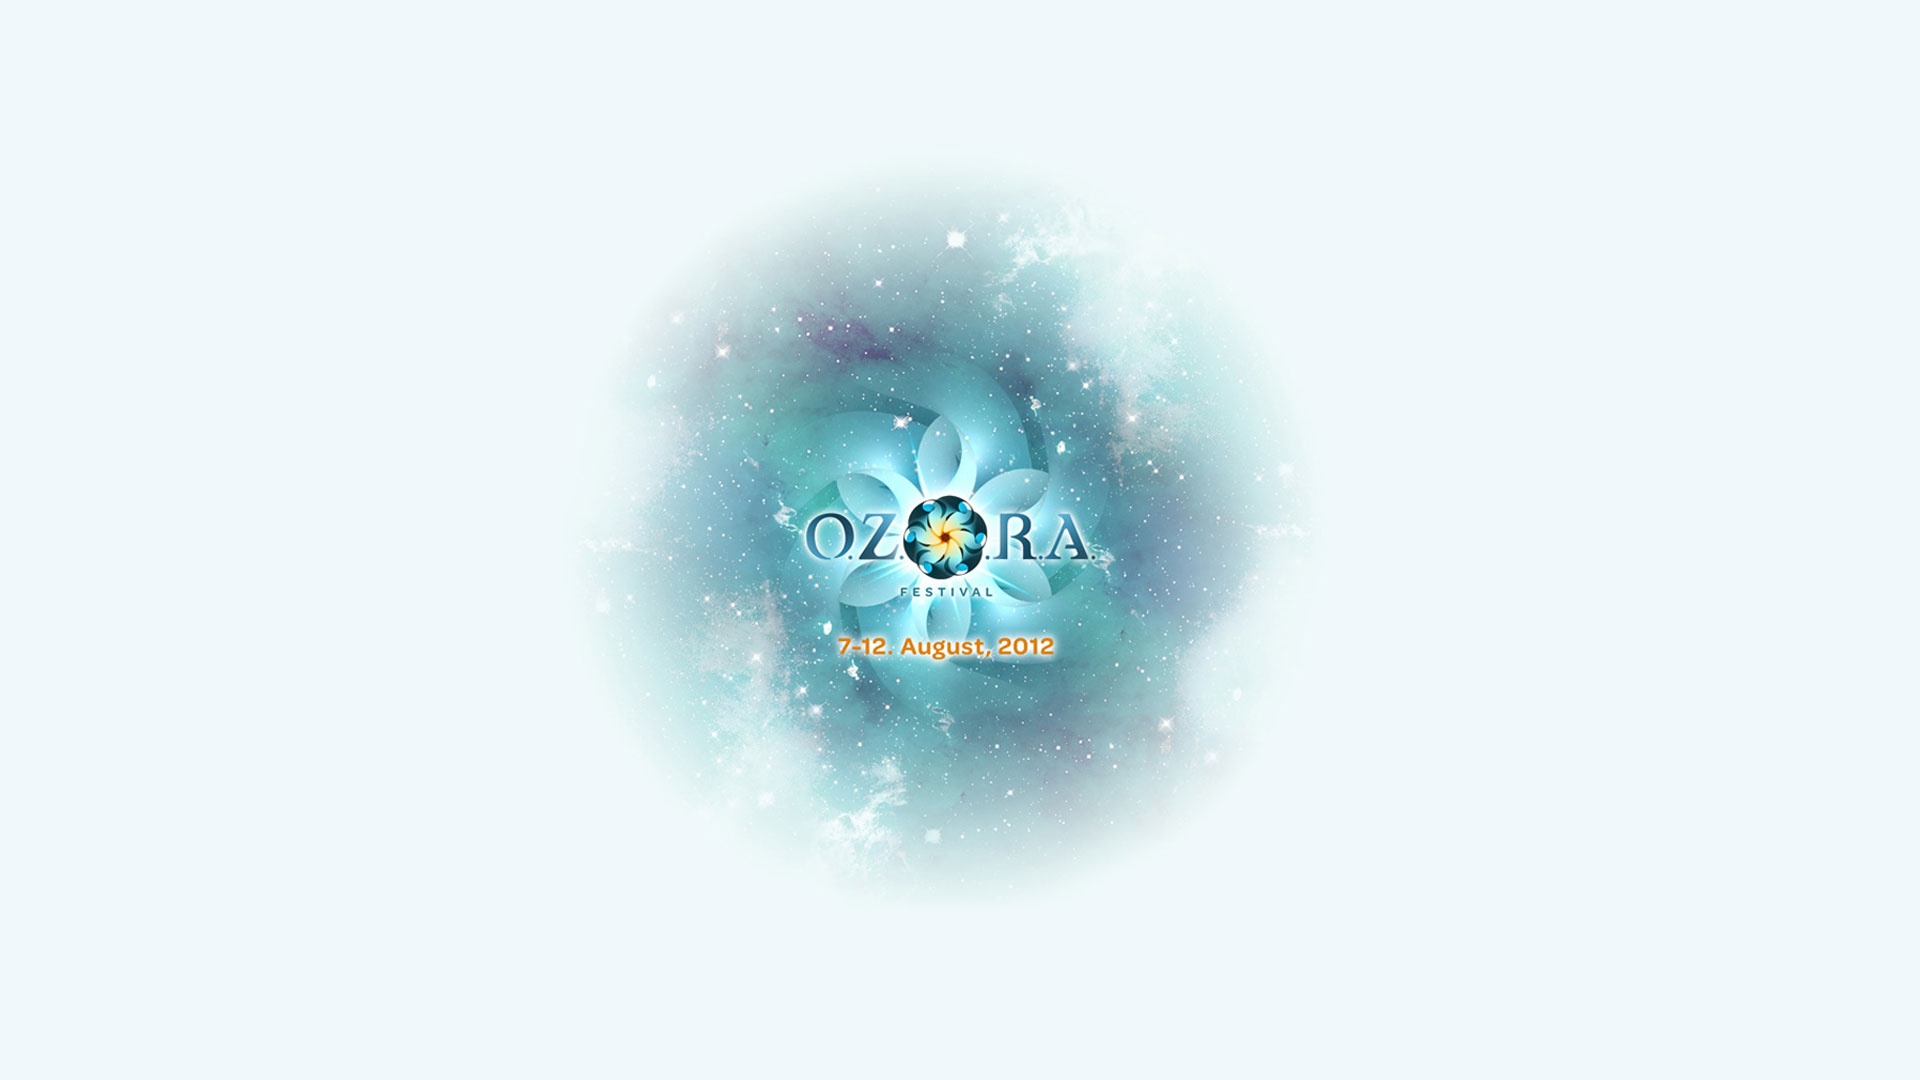 O.Z.O.R.A Festival 2012 HD and Wide Wallpapers